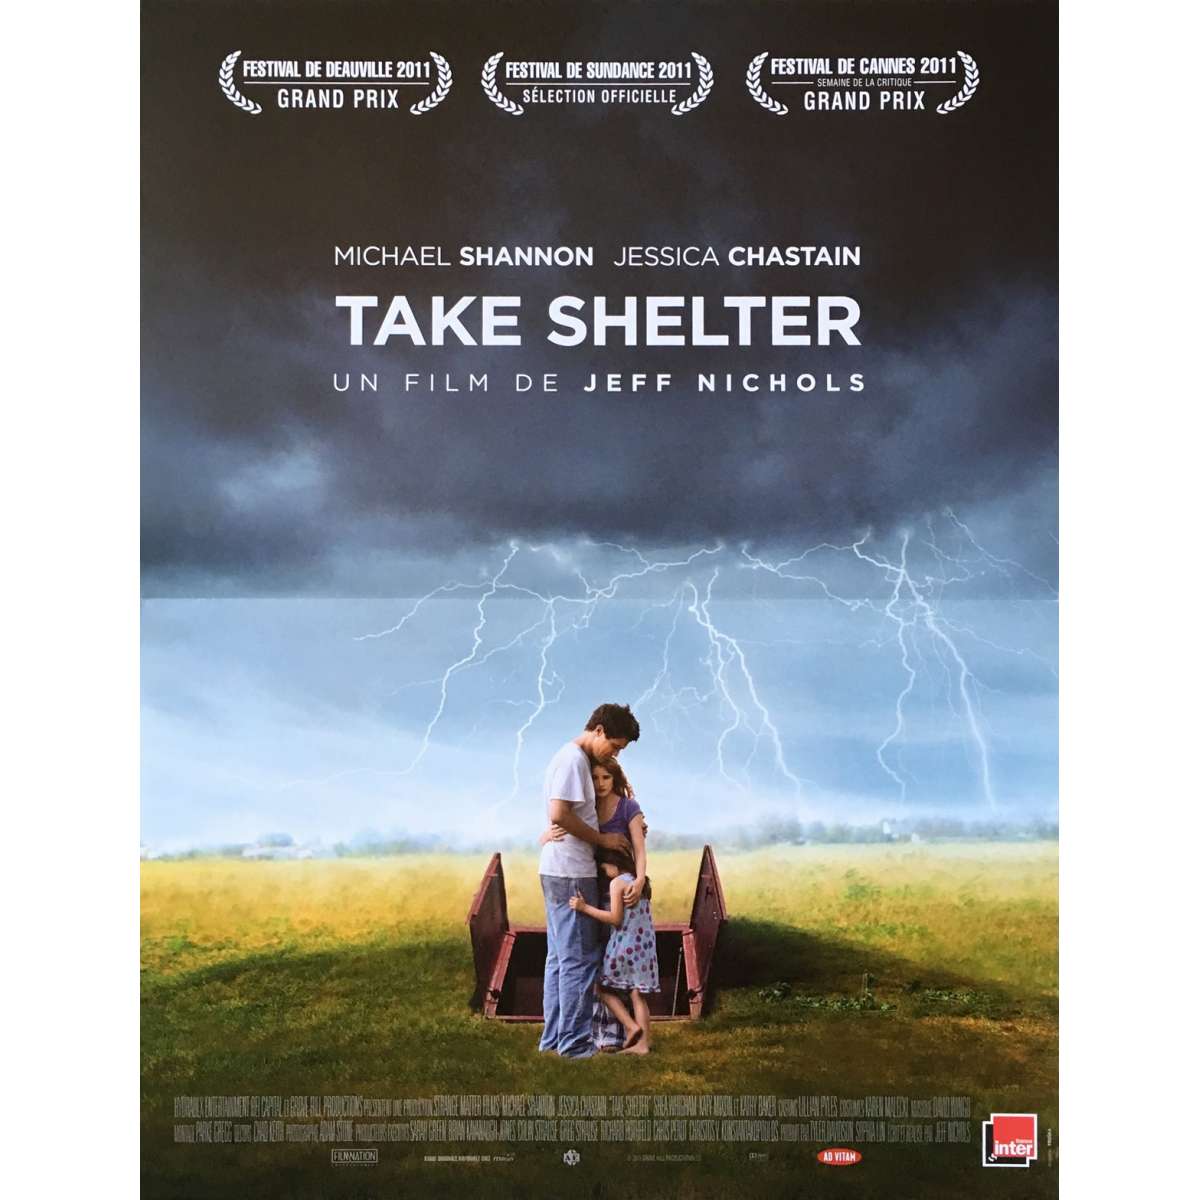 49 Top Images Take Shelter Movie Review - Michael Shannon in Take Shelter, 2011 | Apocalypse movies ...